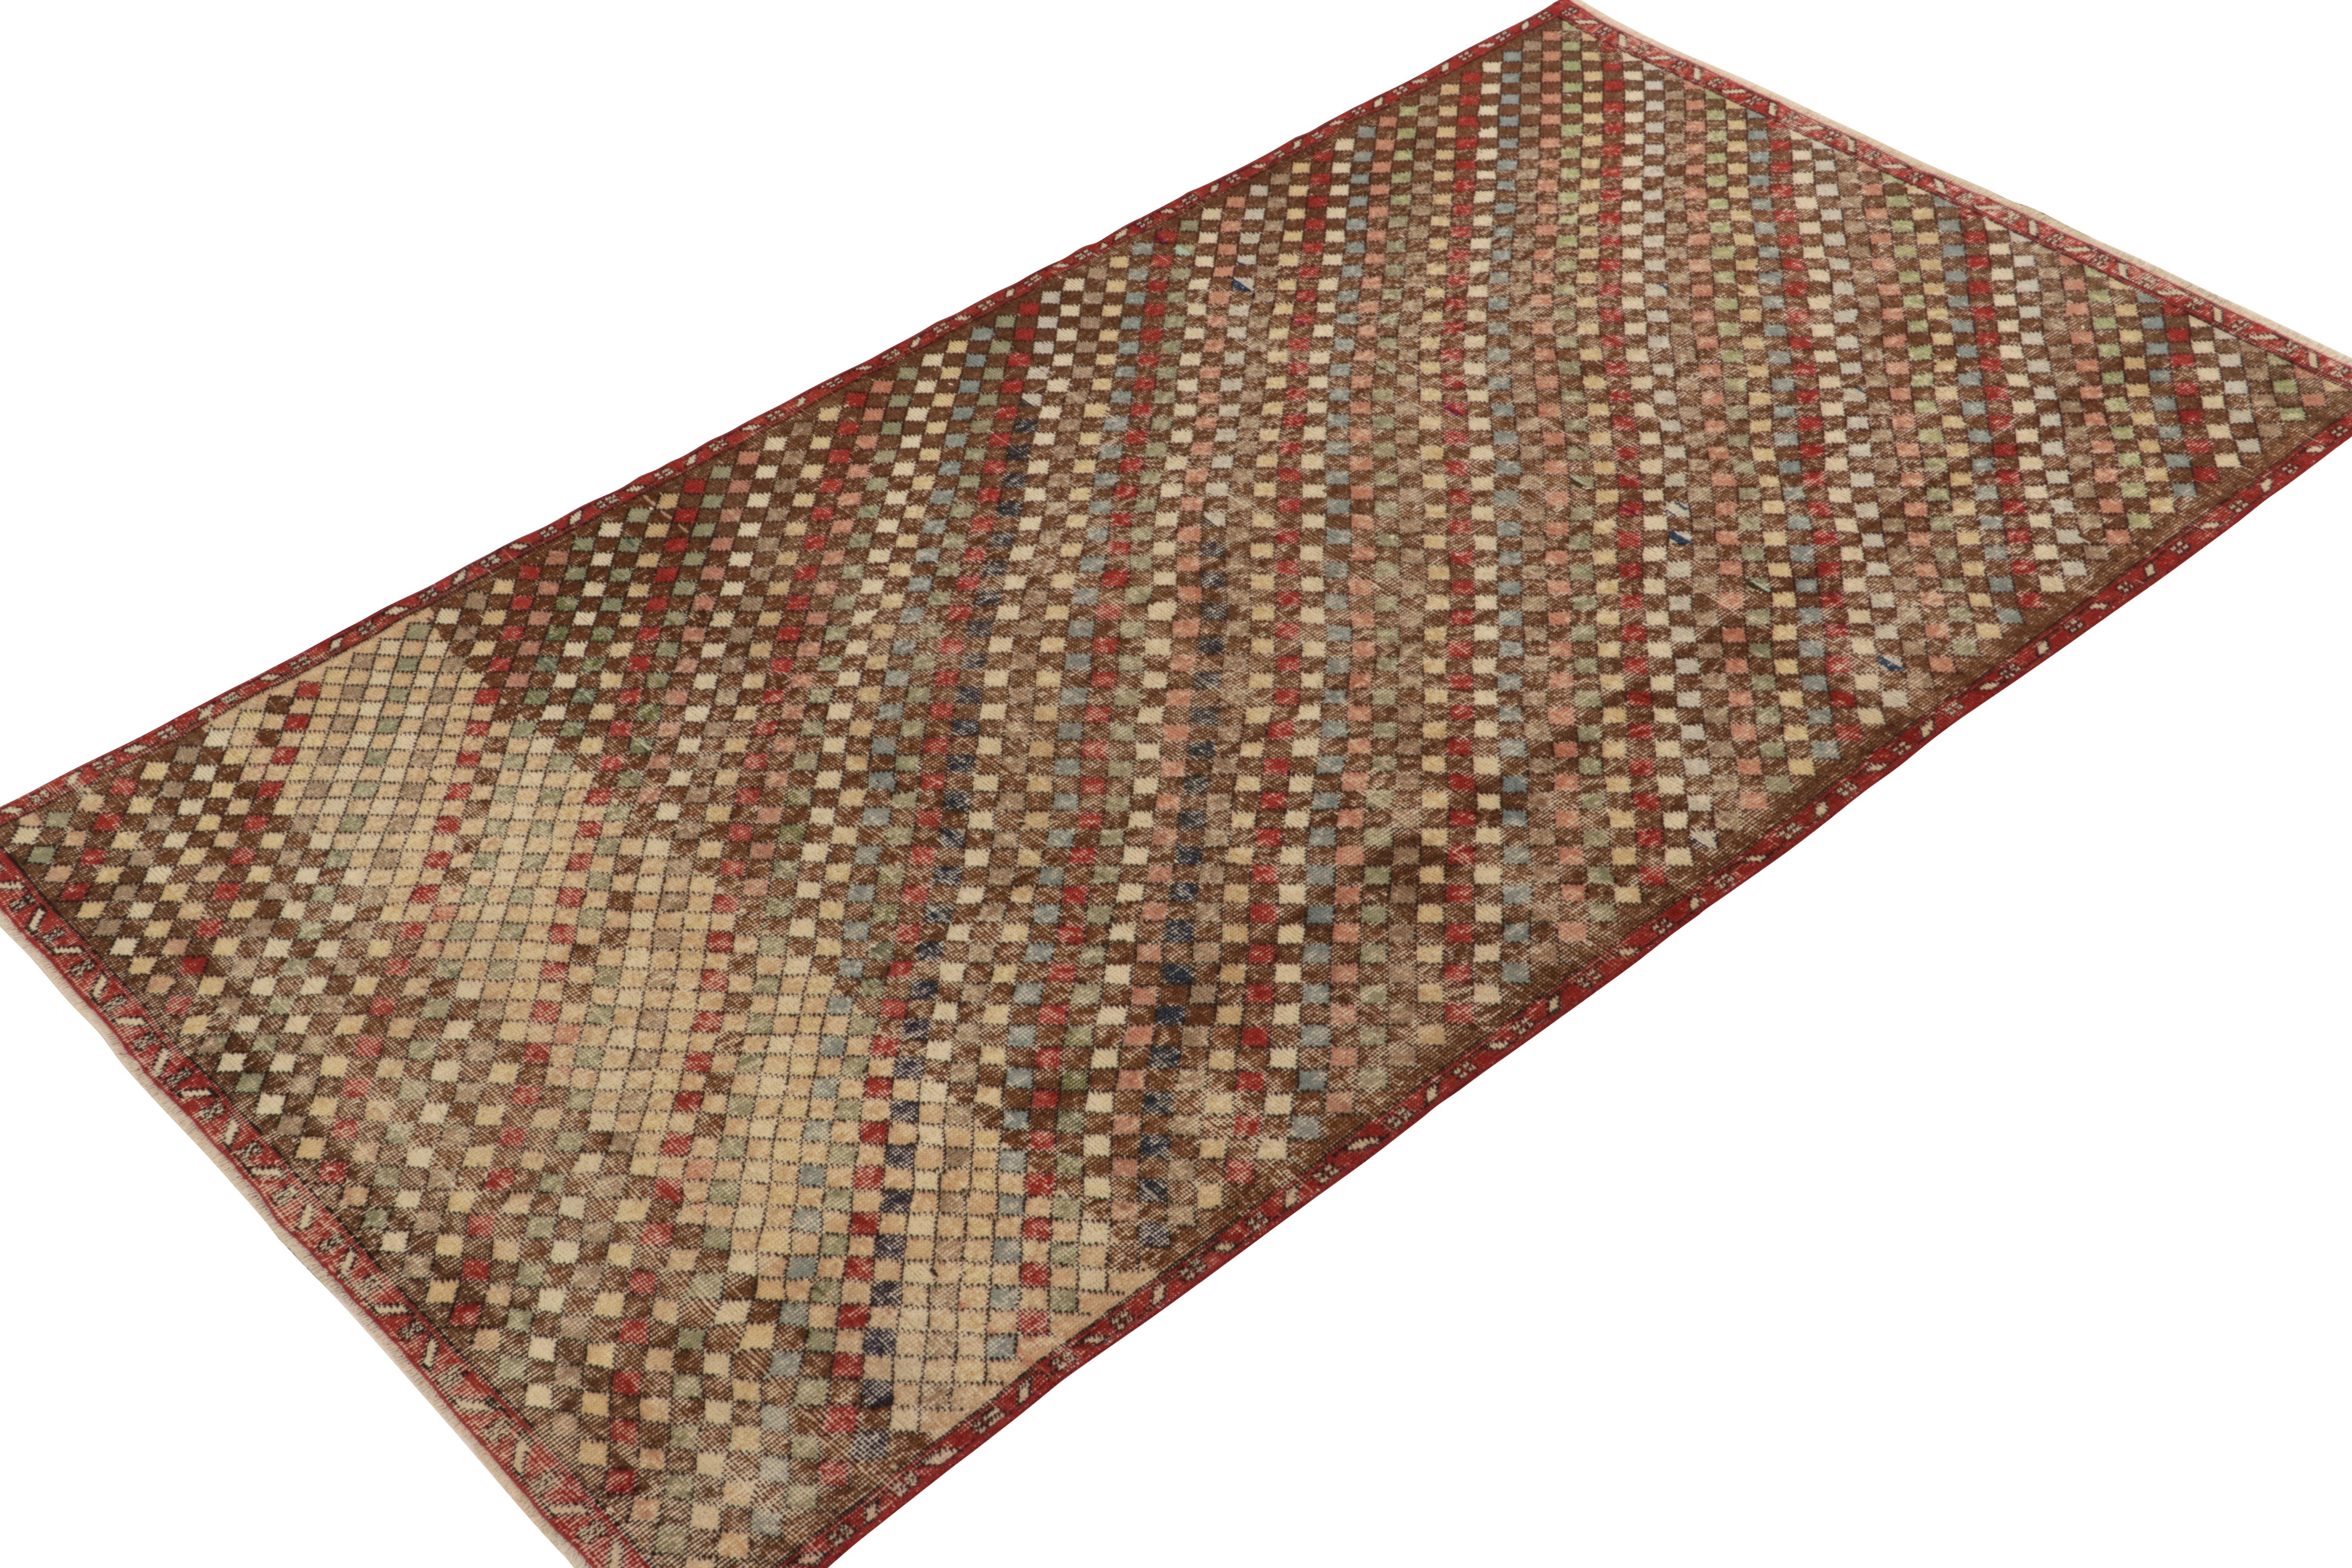 Hand-knotted in wool, a 5x9 vintage rug from a bold Turkish designer, entering Rug & Kilim’s commemorative Mid-Century Pasha Collection. 

This dedicated piece enjoys a dextrous diamond pattern alternating diagonally in variegated tones of red,